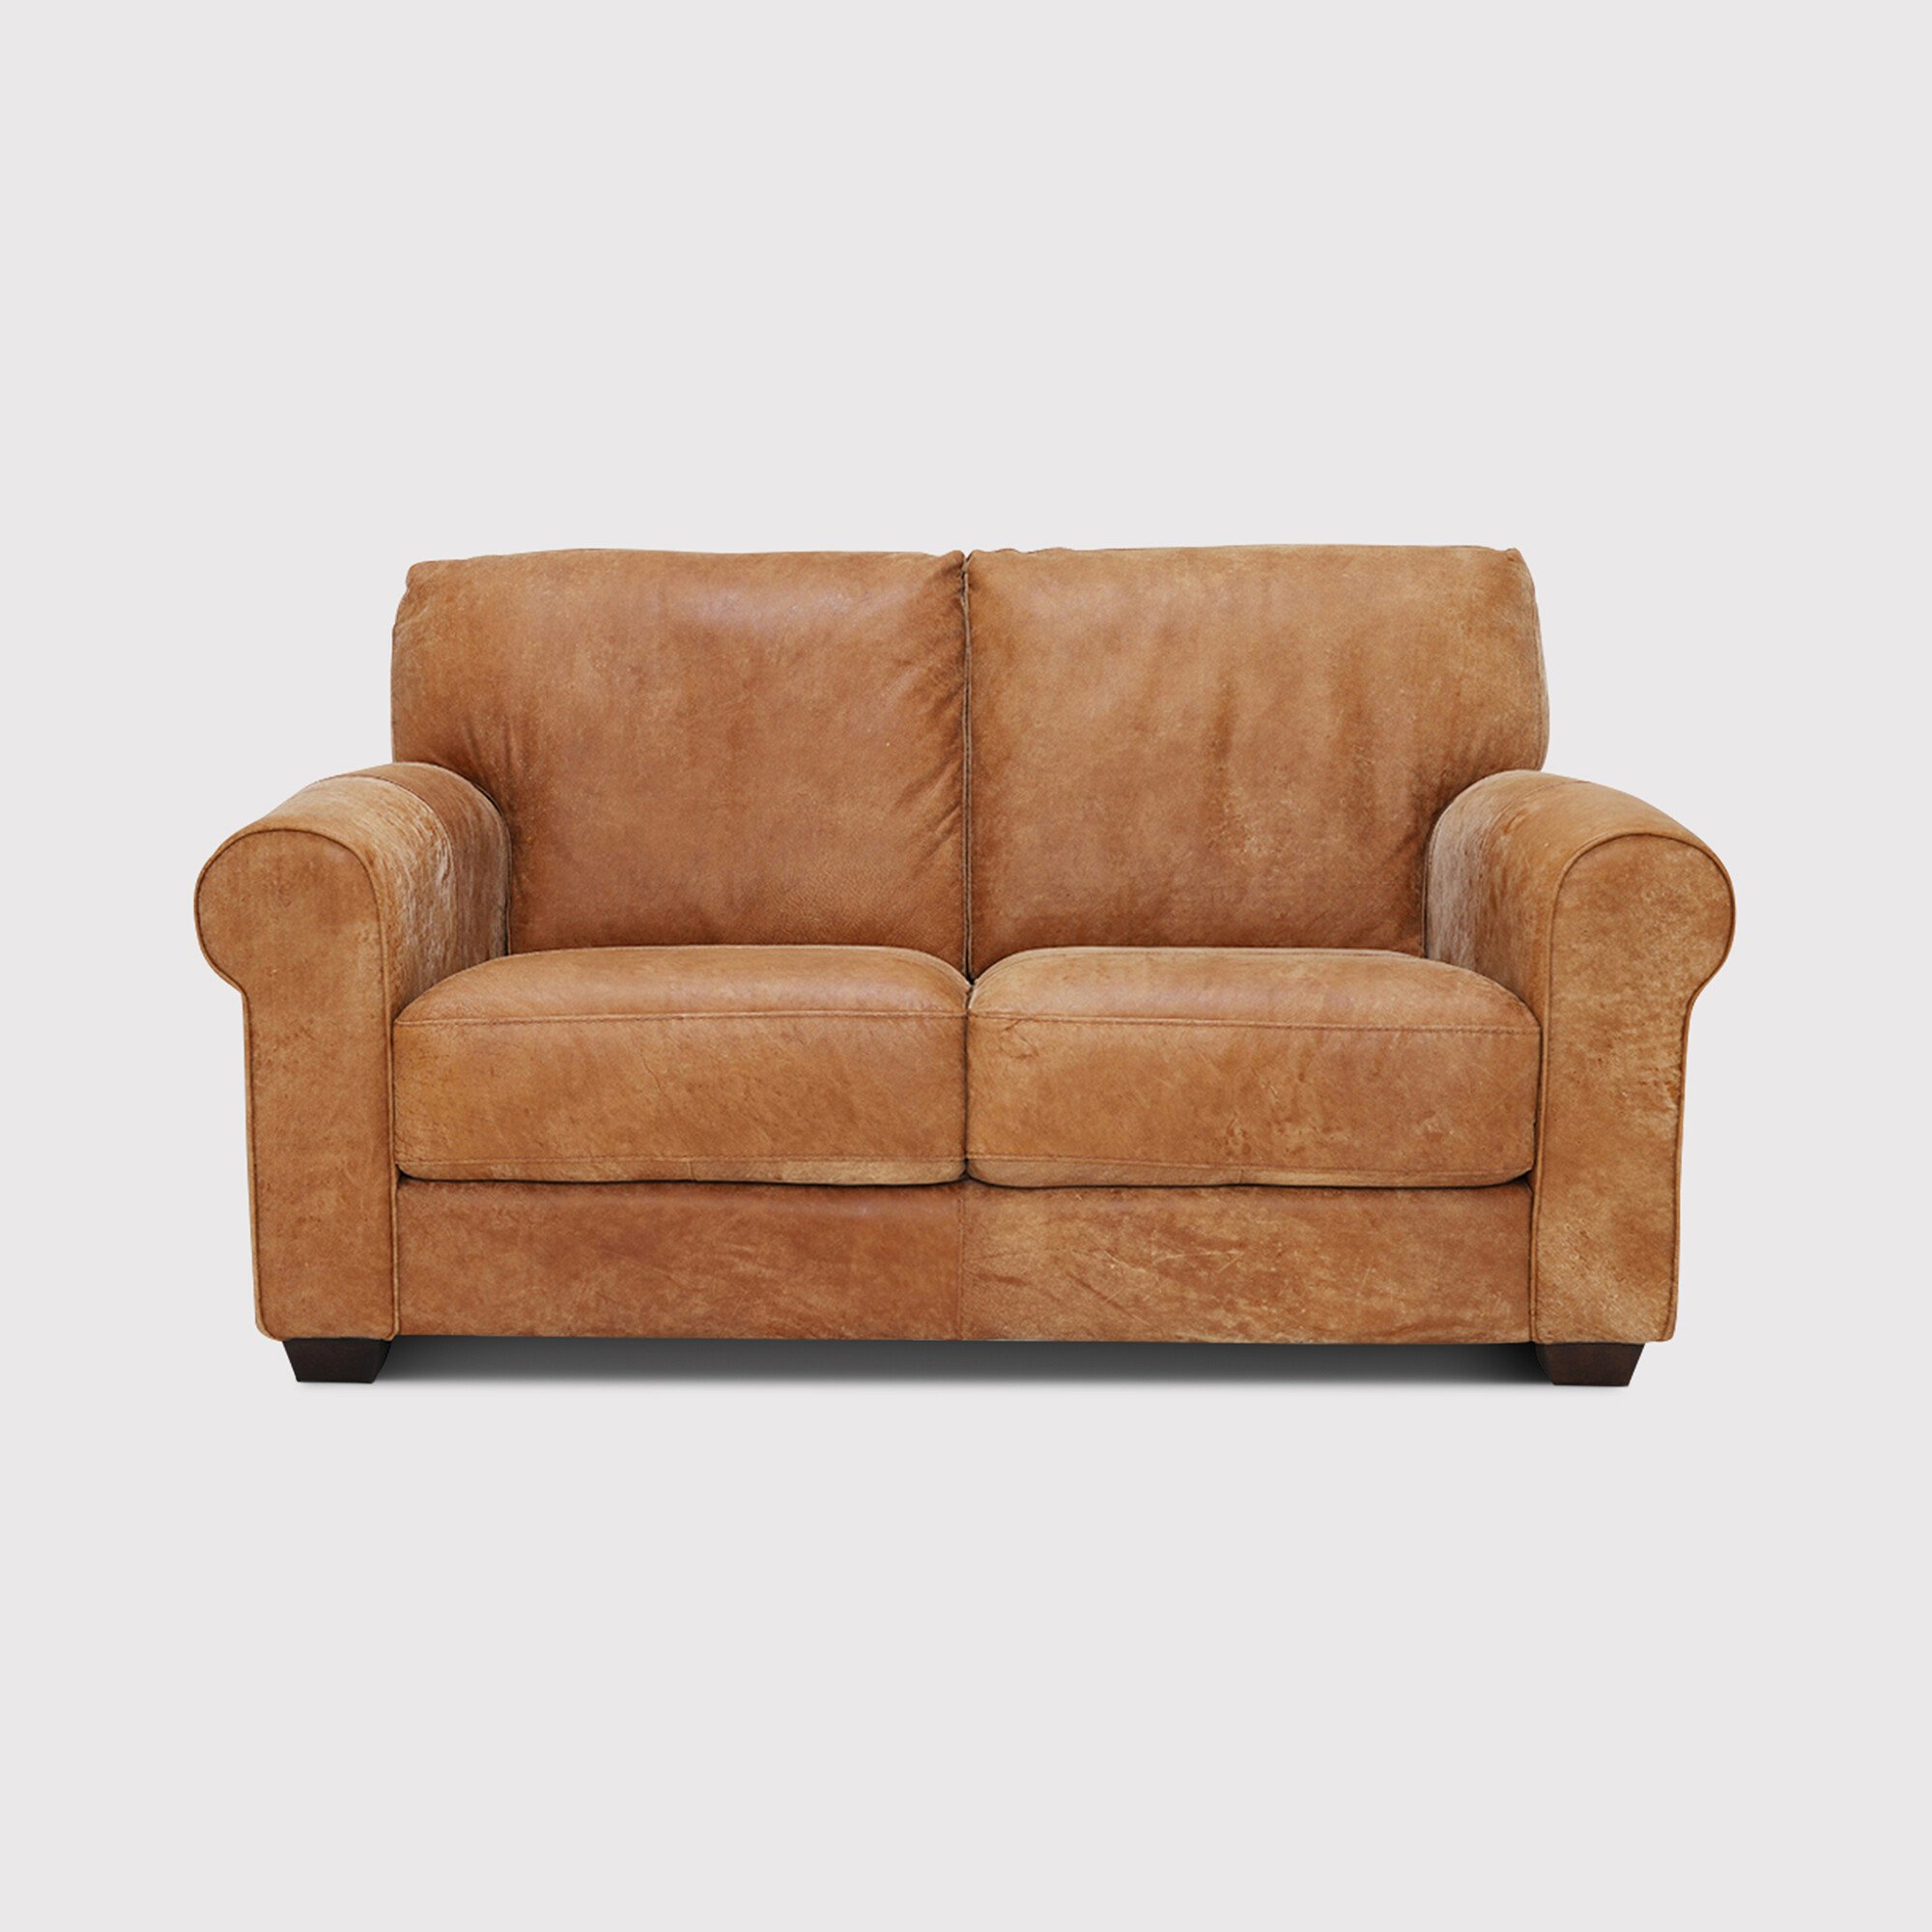 Houston Love Seat Sofa, Brown Leather | Barker & Stonehouse